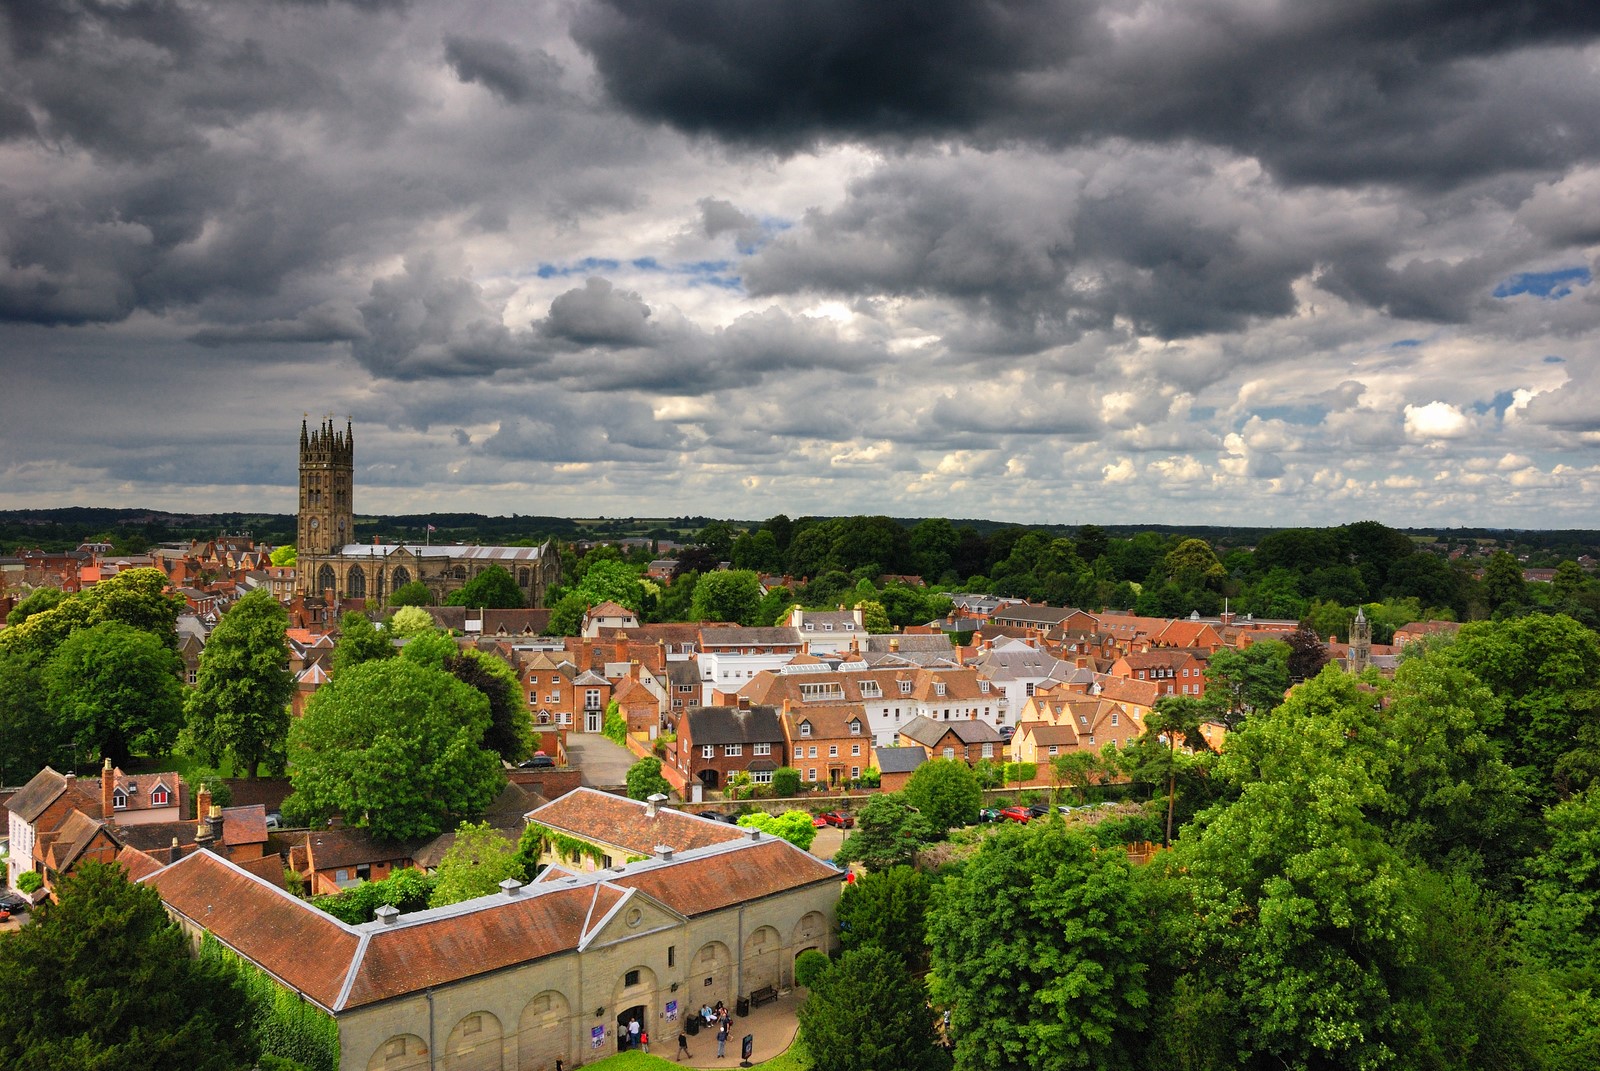 Warwick overview from the castle